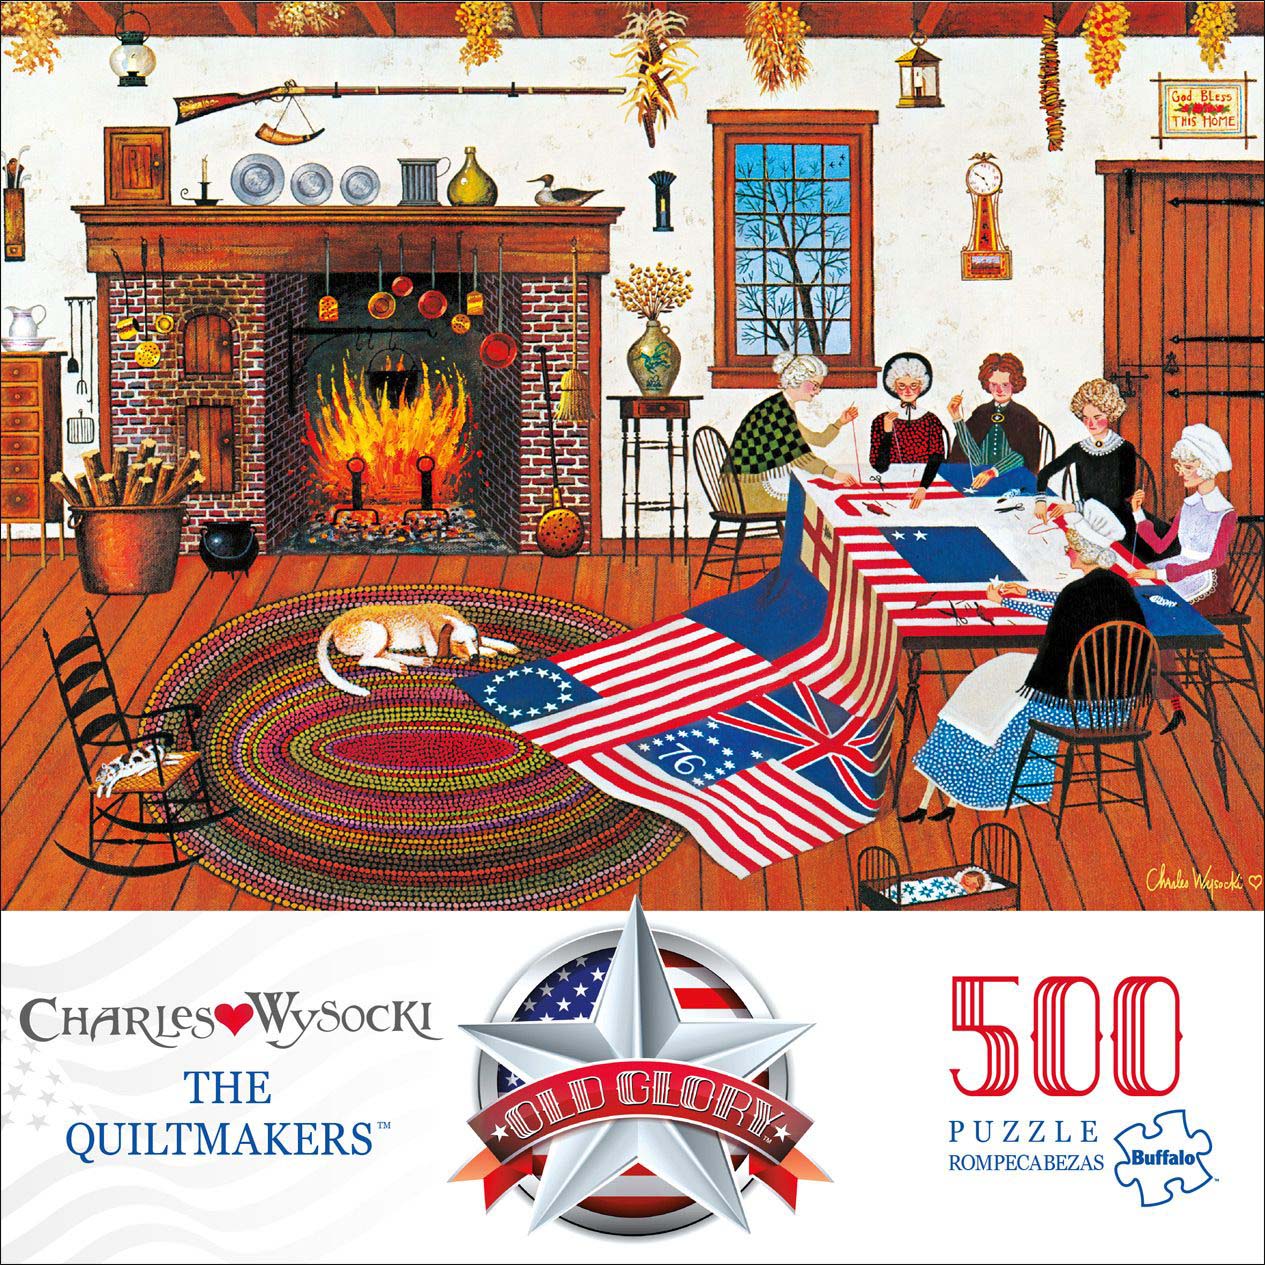 The Quiltmakers